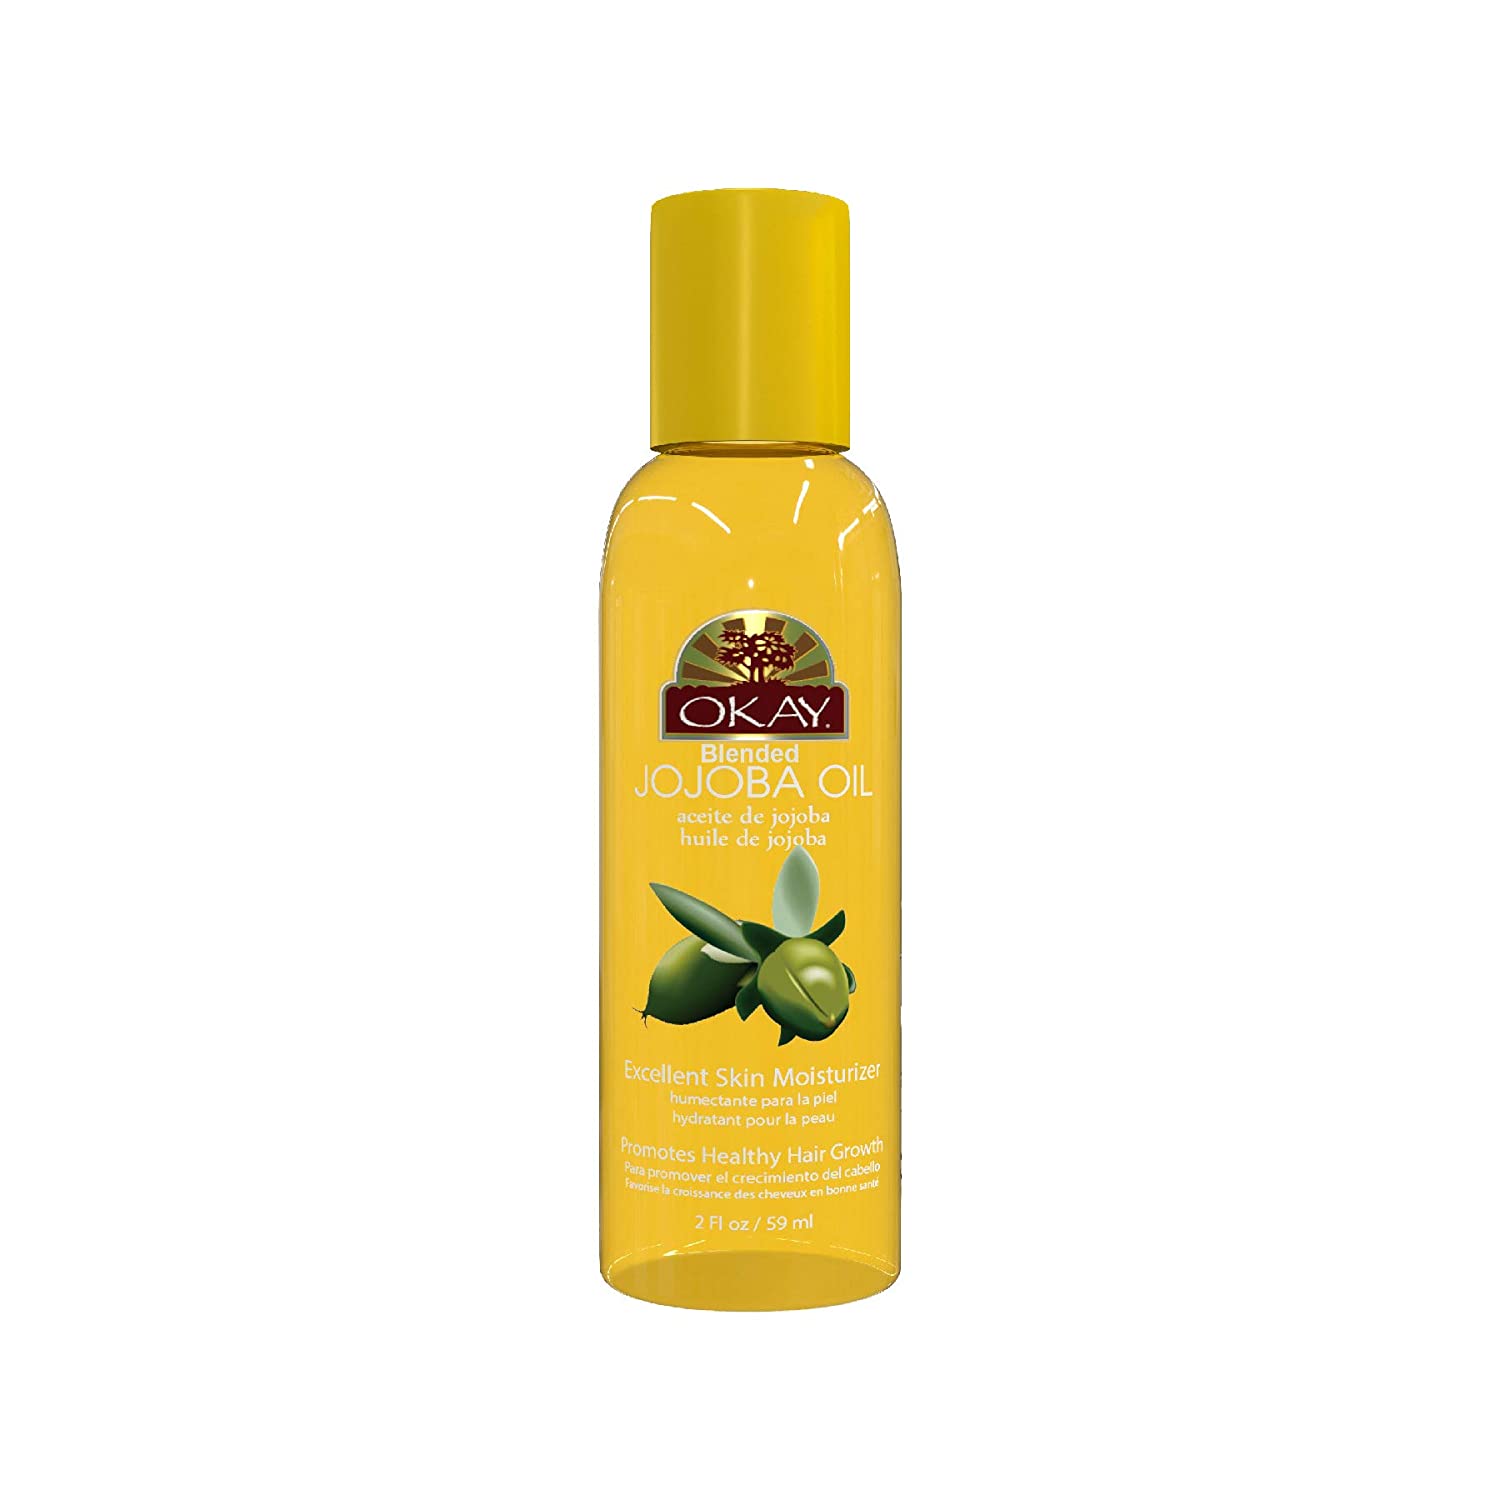 LemonGrass Blended Oil for Hair&Skin Helps Nourish And Strengthen Hair Follicles Helps Prevent Acne Breakouts&Blemishes No Parabens For All Hair&Skin Types And Textures Made in USA 2oz